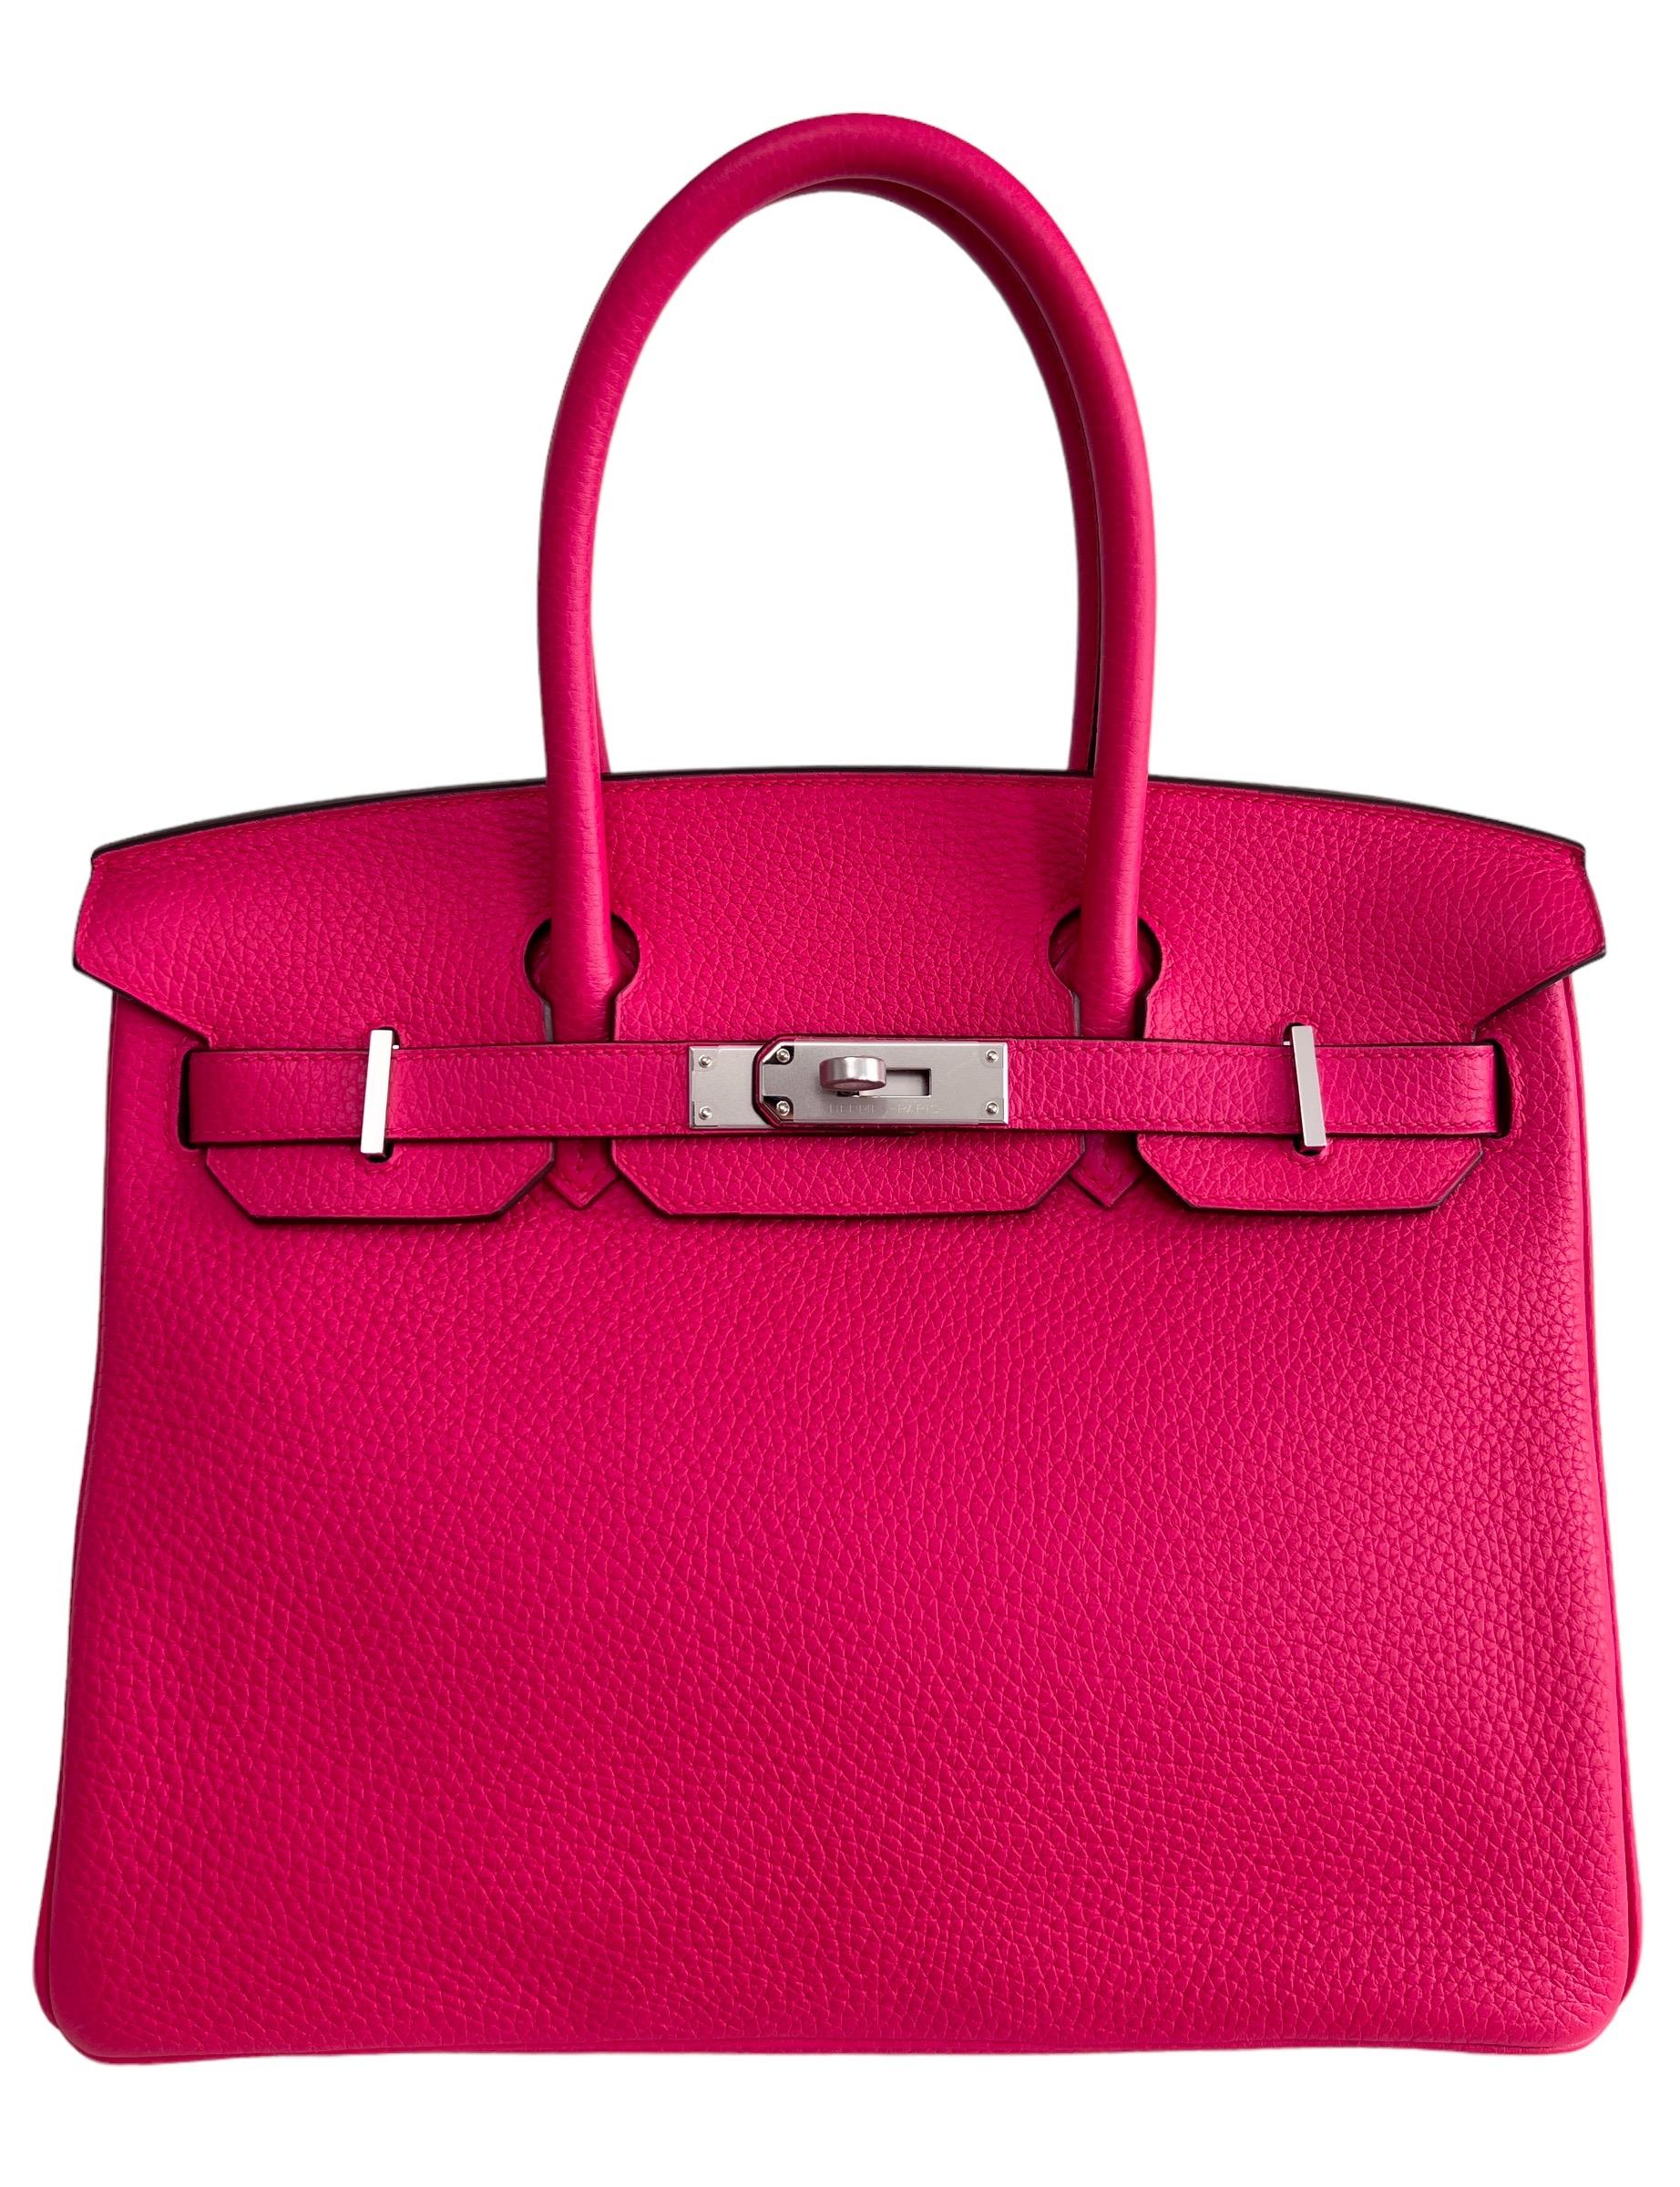 Stunning As New Hermes Birkin 30 Rose Extreme Palladium Hardware. 2019 D Stamp. As New!

Shop with Confidence from Lux Addicts. Authenticity Guaranteed! 

Lux Addicts is a Premier Luxury Dealer and one of the most trusted sellers in the luxury